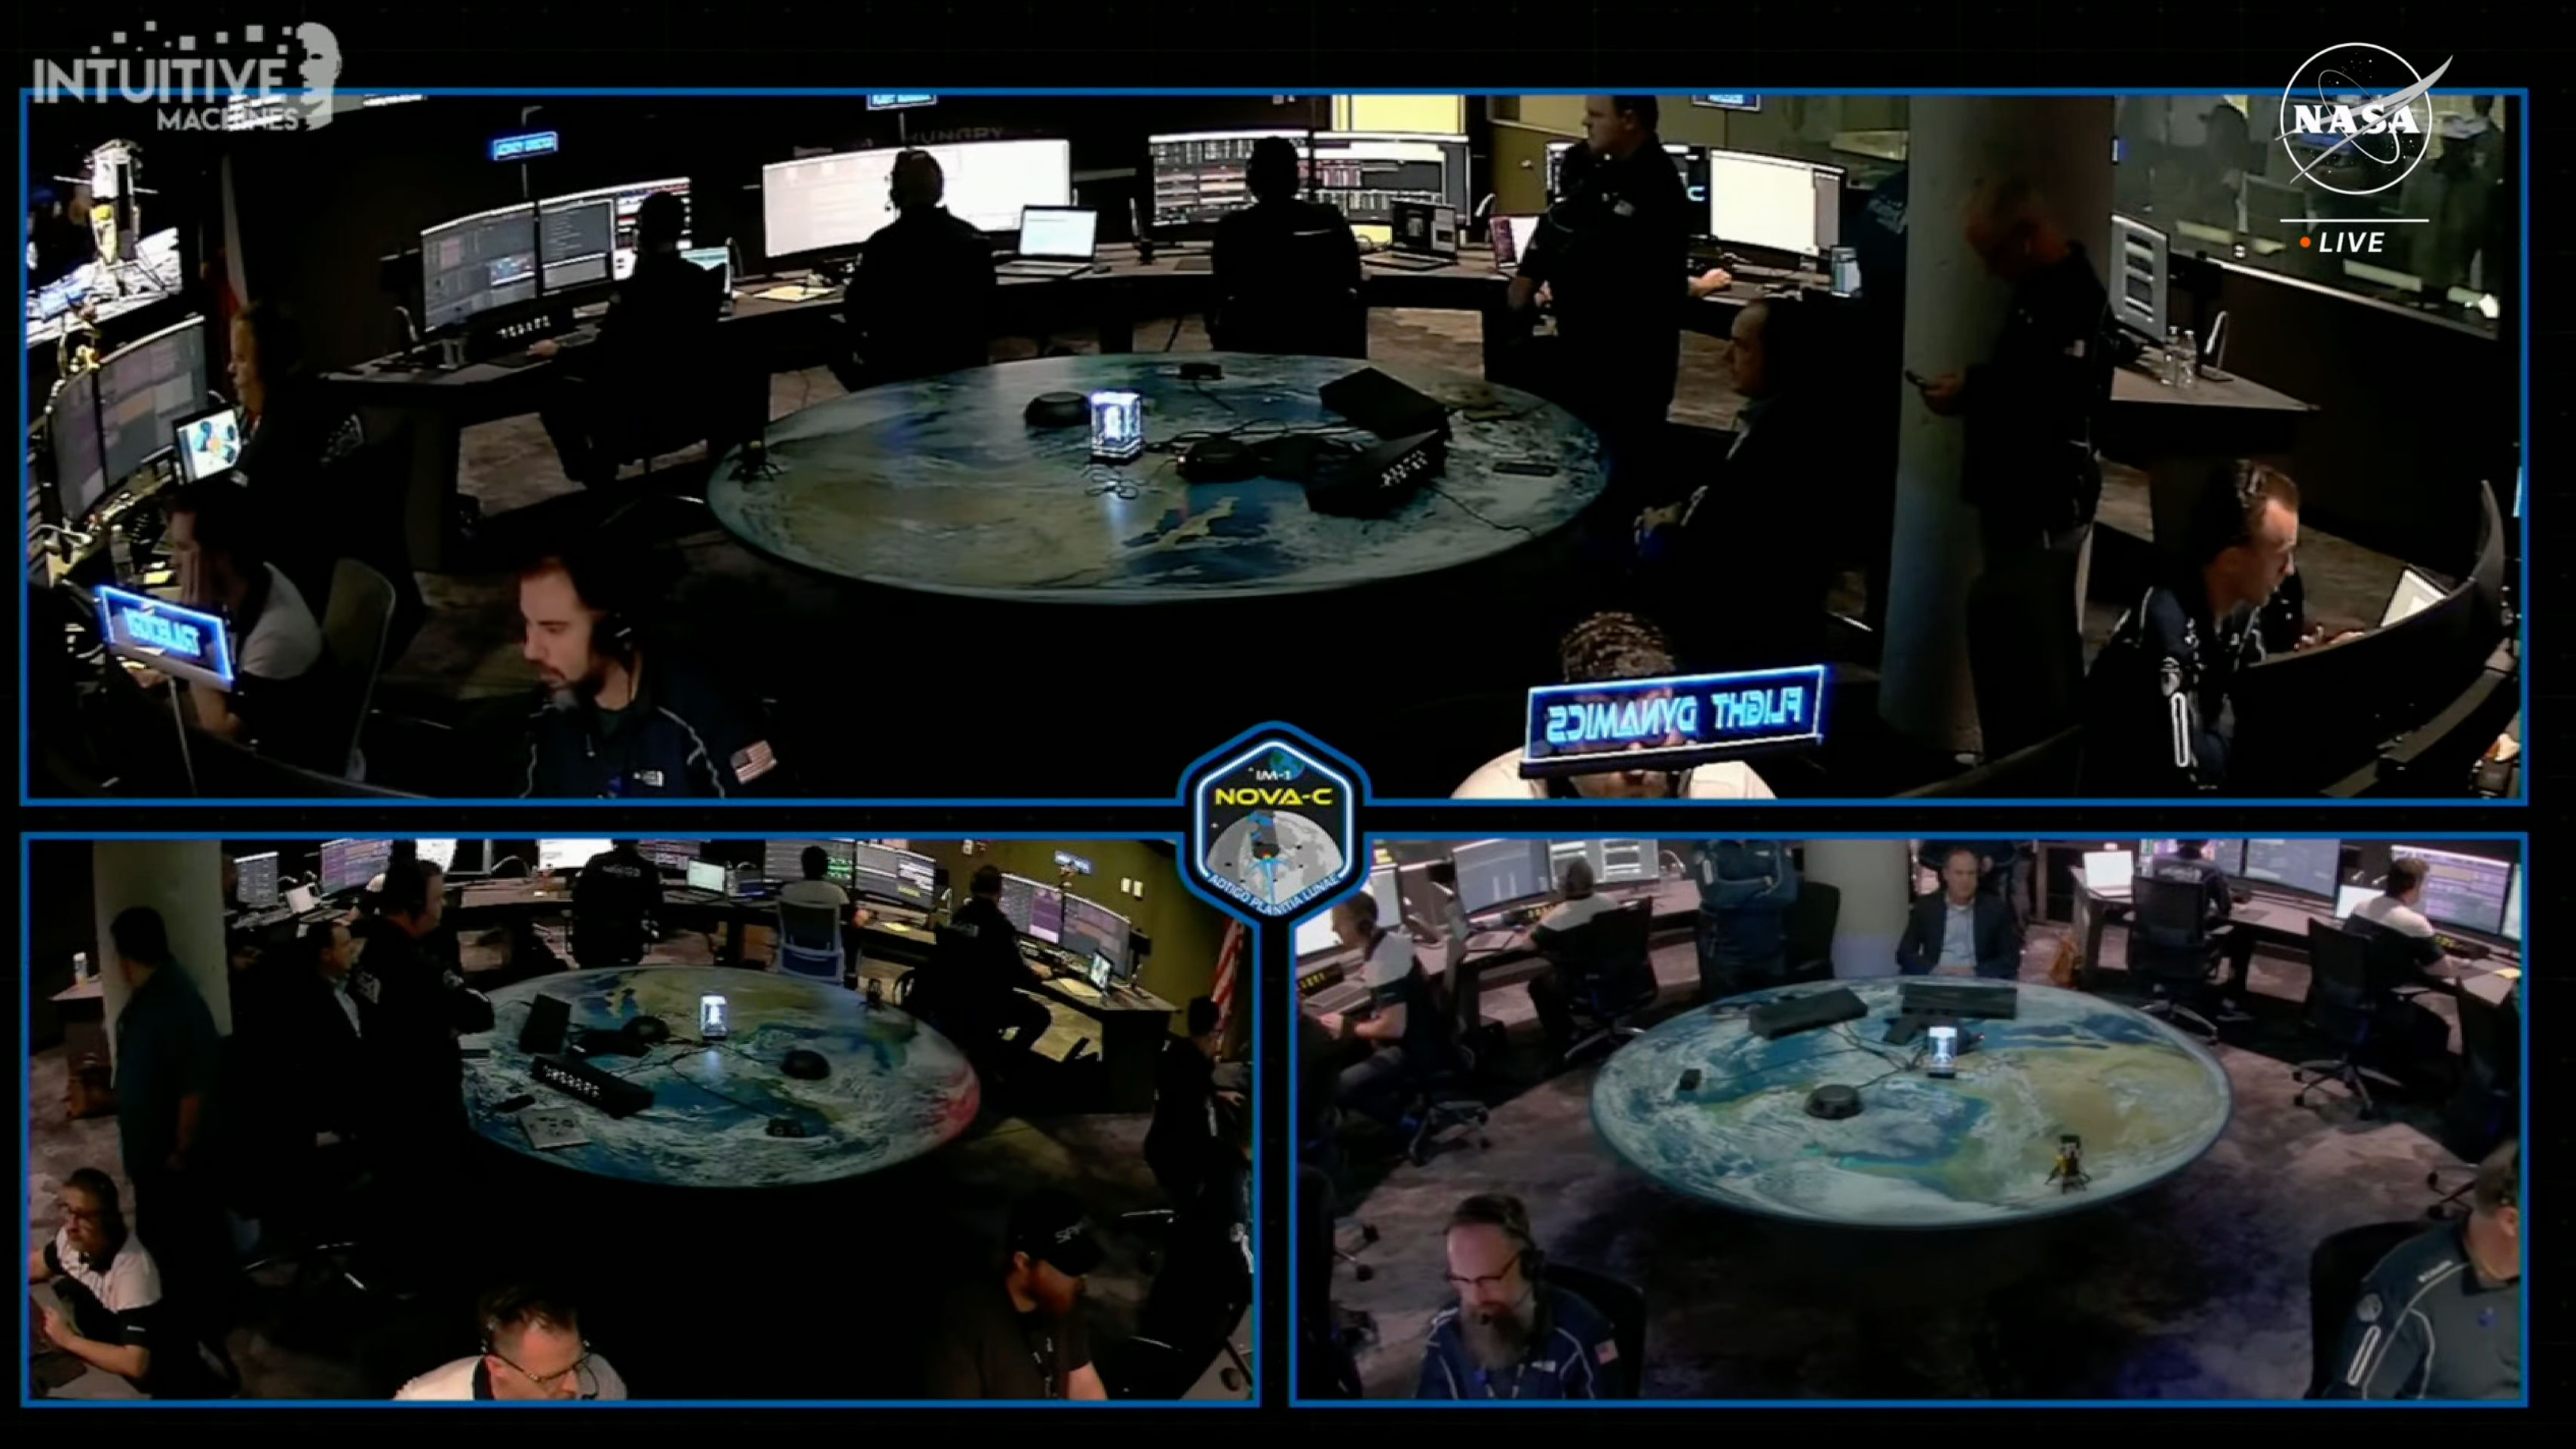 Mission control is seen in this still from the livestreamed webcast.